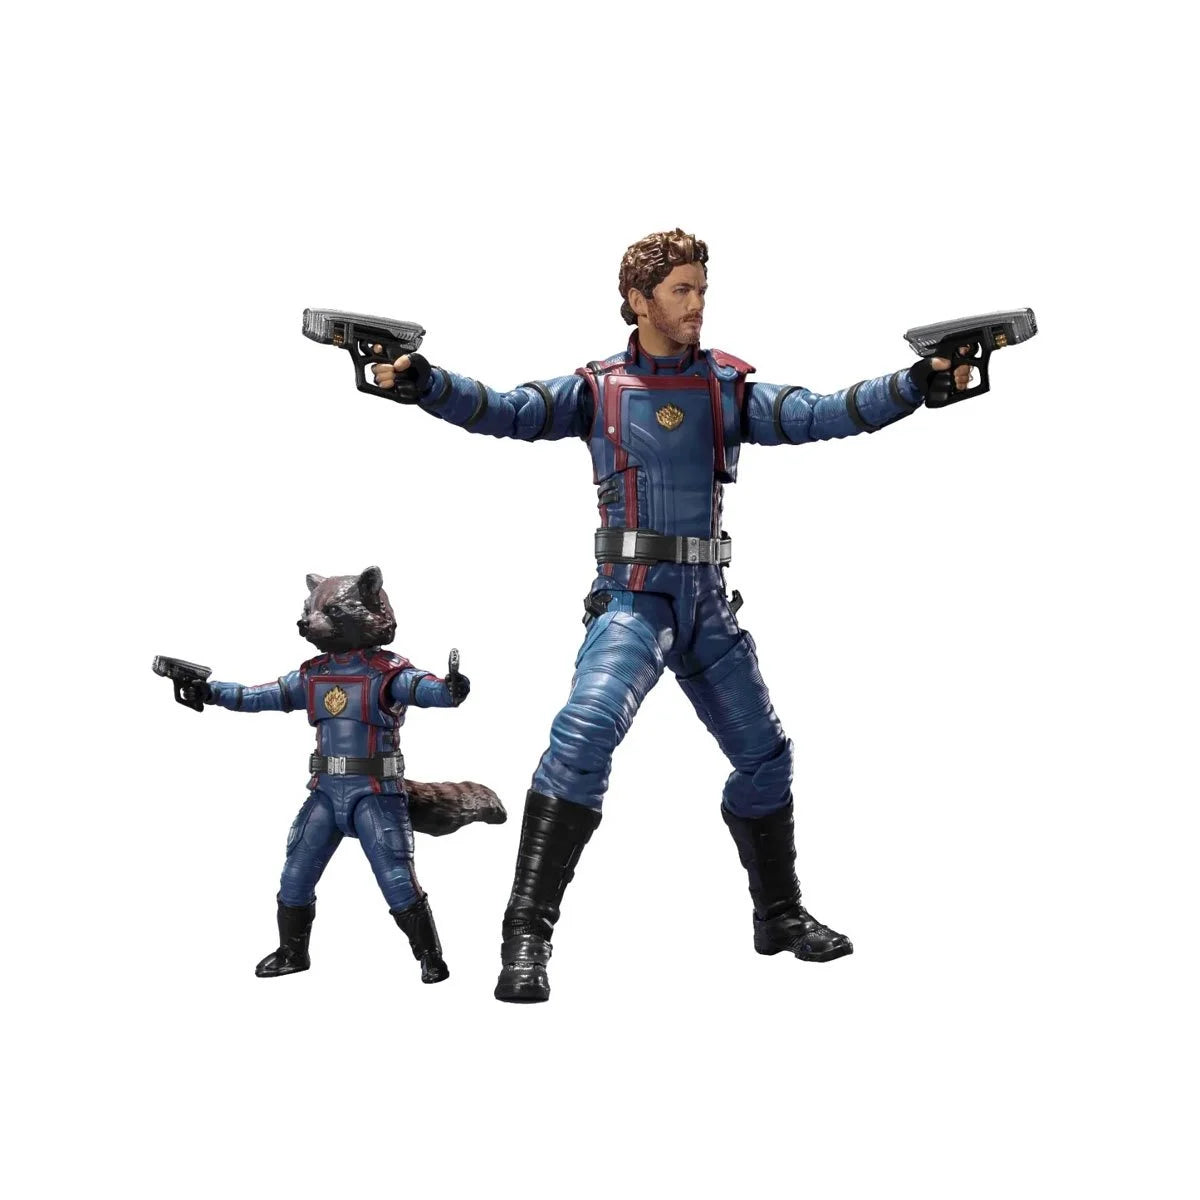 Guardians Galaxy Vol. 3 Star-Lord and Rocket Action FIgures by S.H.Figuarts -SH Figuarts - India - www.superherotoystore.com